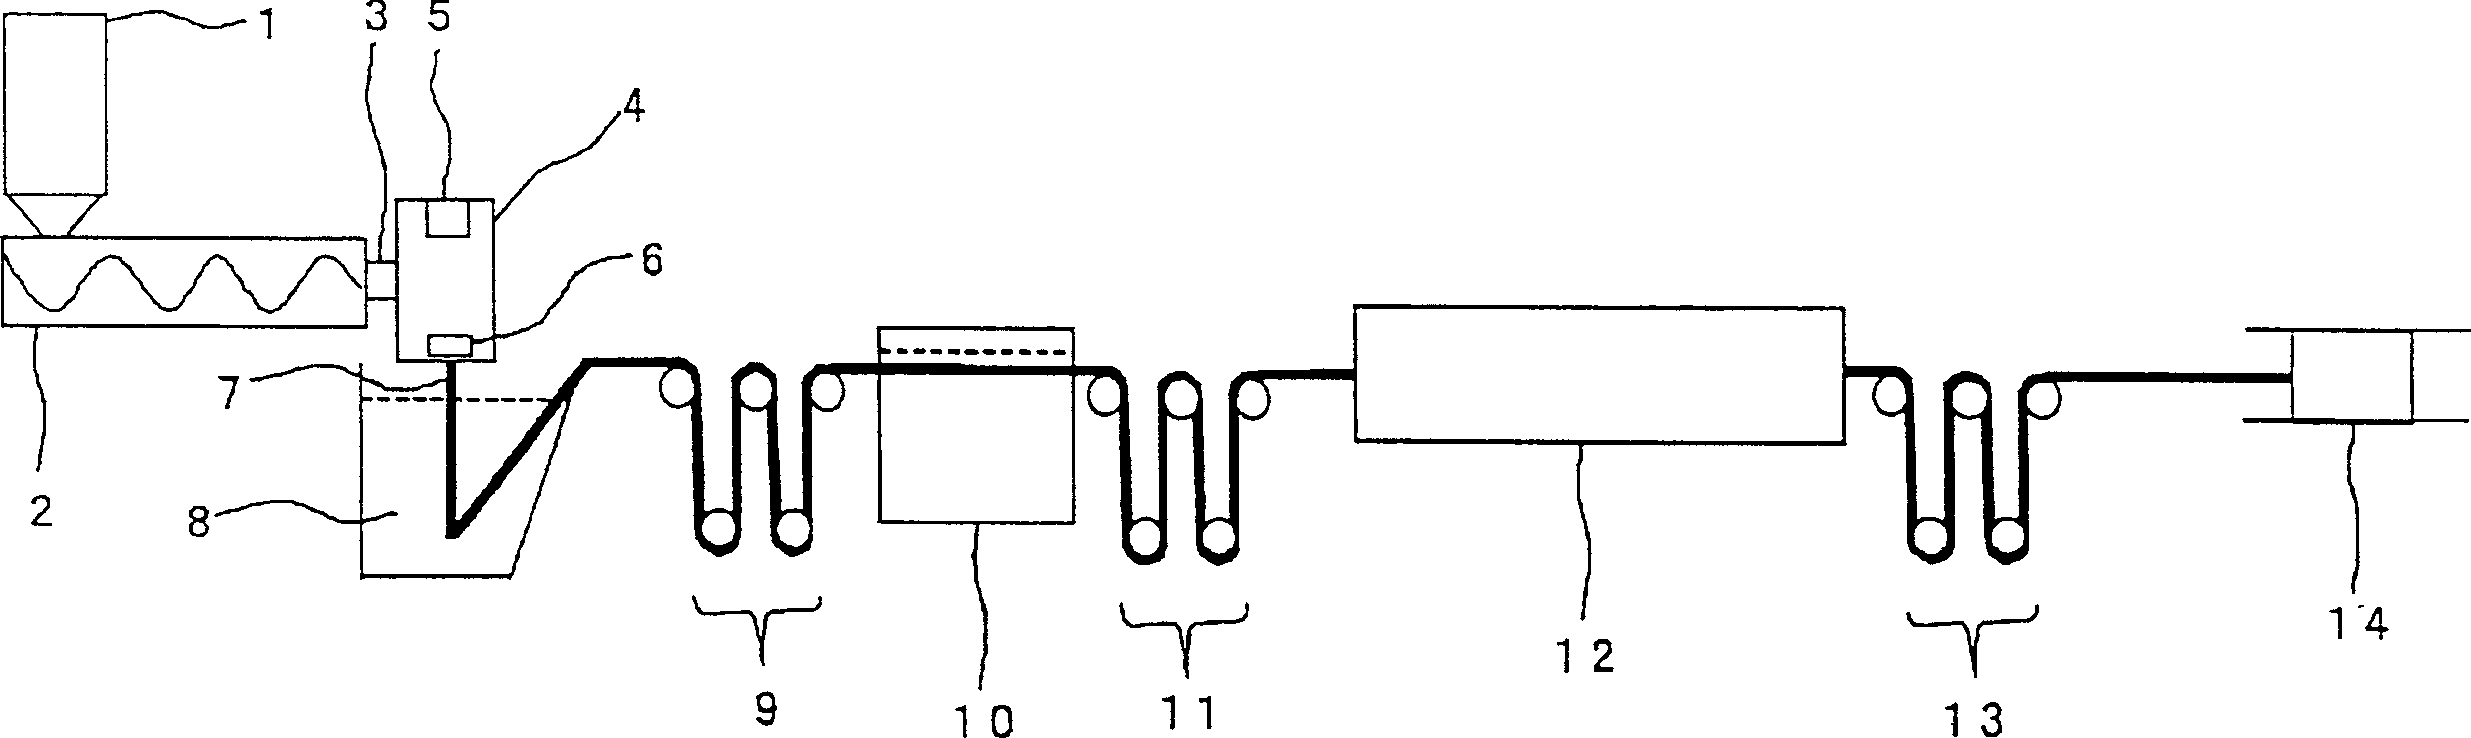 Monofilament yarn and process for producing same